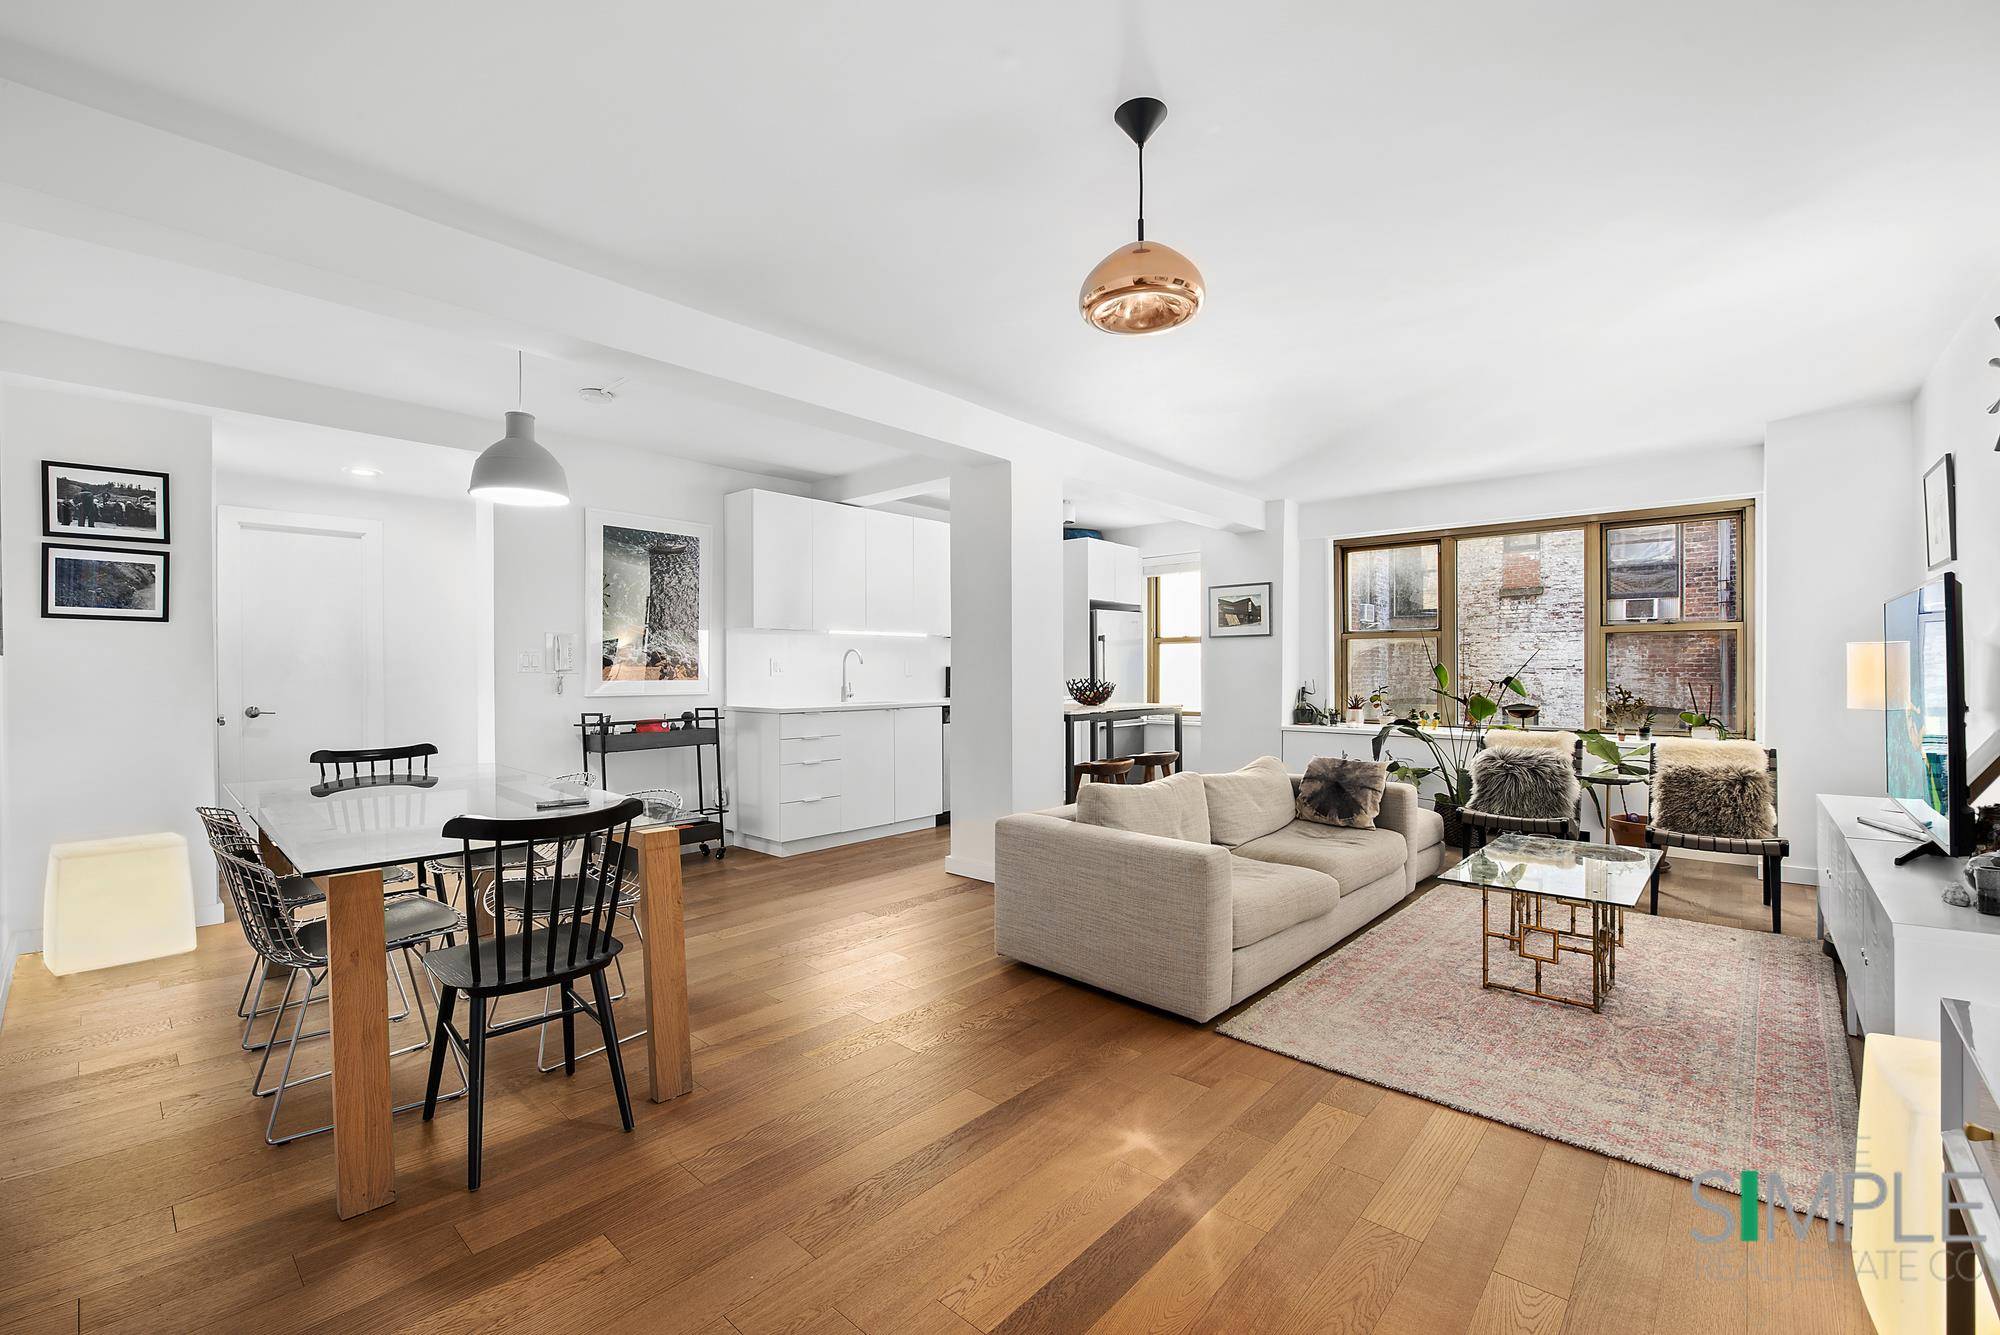 West Village dreams do come true in this beautifully renovated one bedroom home boasting a modern kitchen, new hardwood floors and marble windowed bathroom.